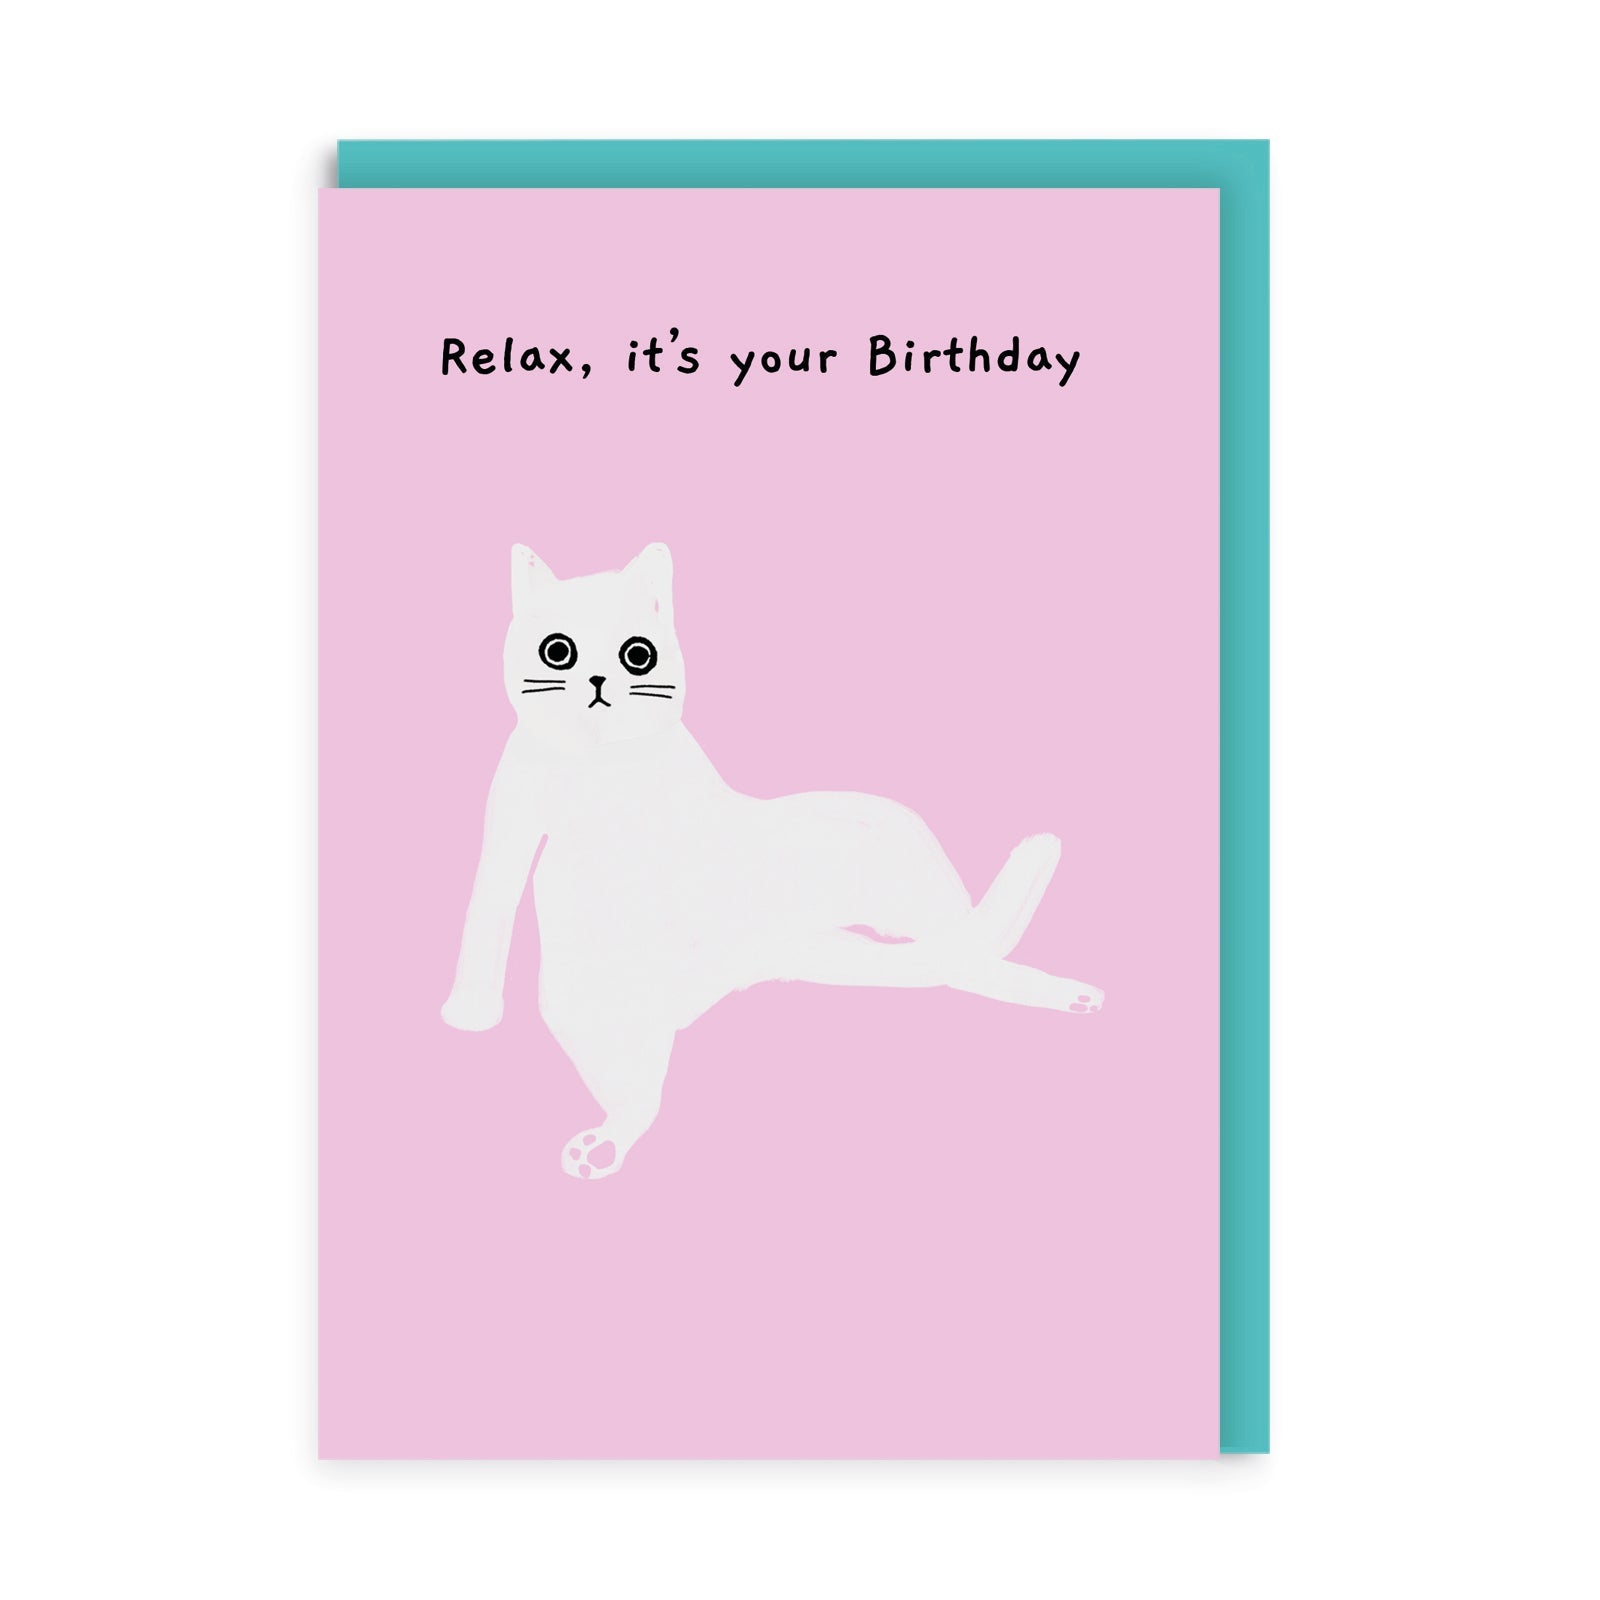 Pink birthday card with a cartoon cat sat back and relaxing with the text Relax, it's your birthday